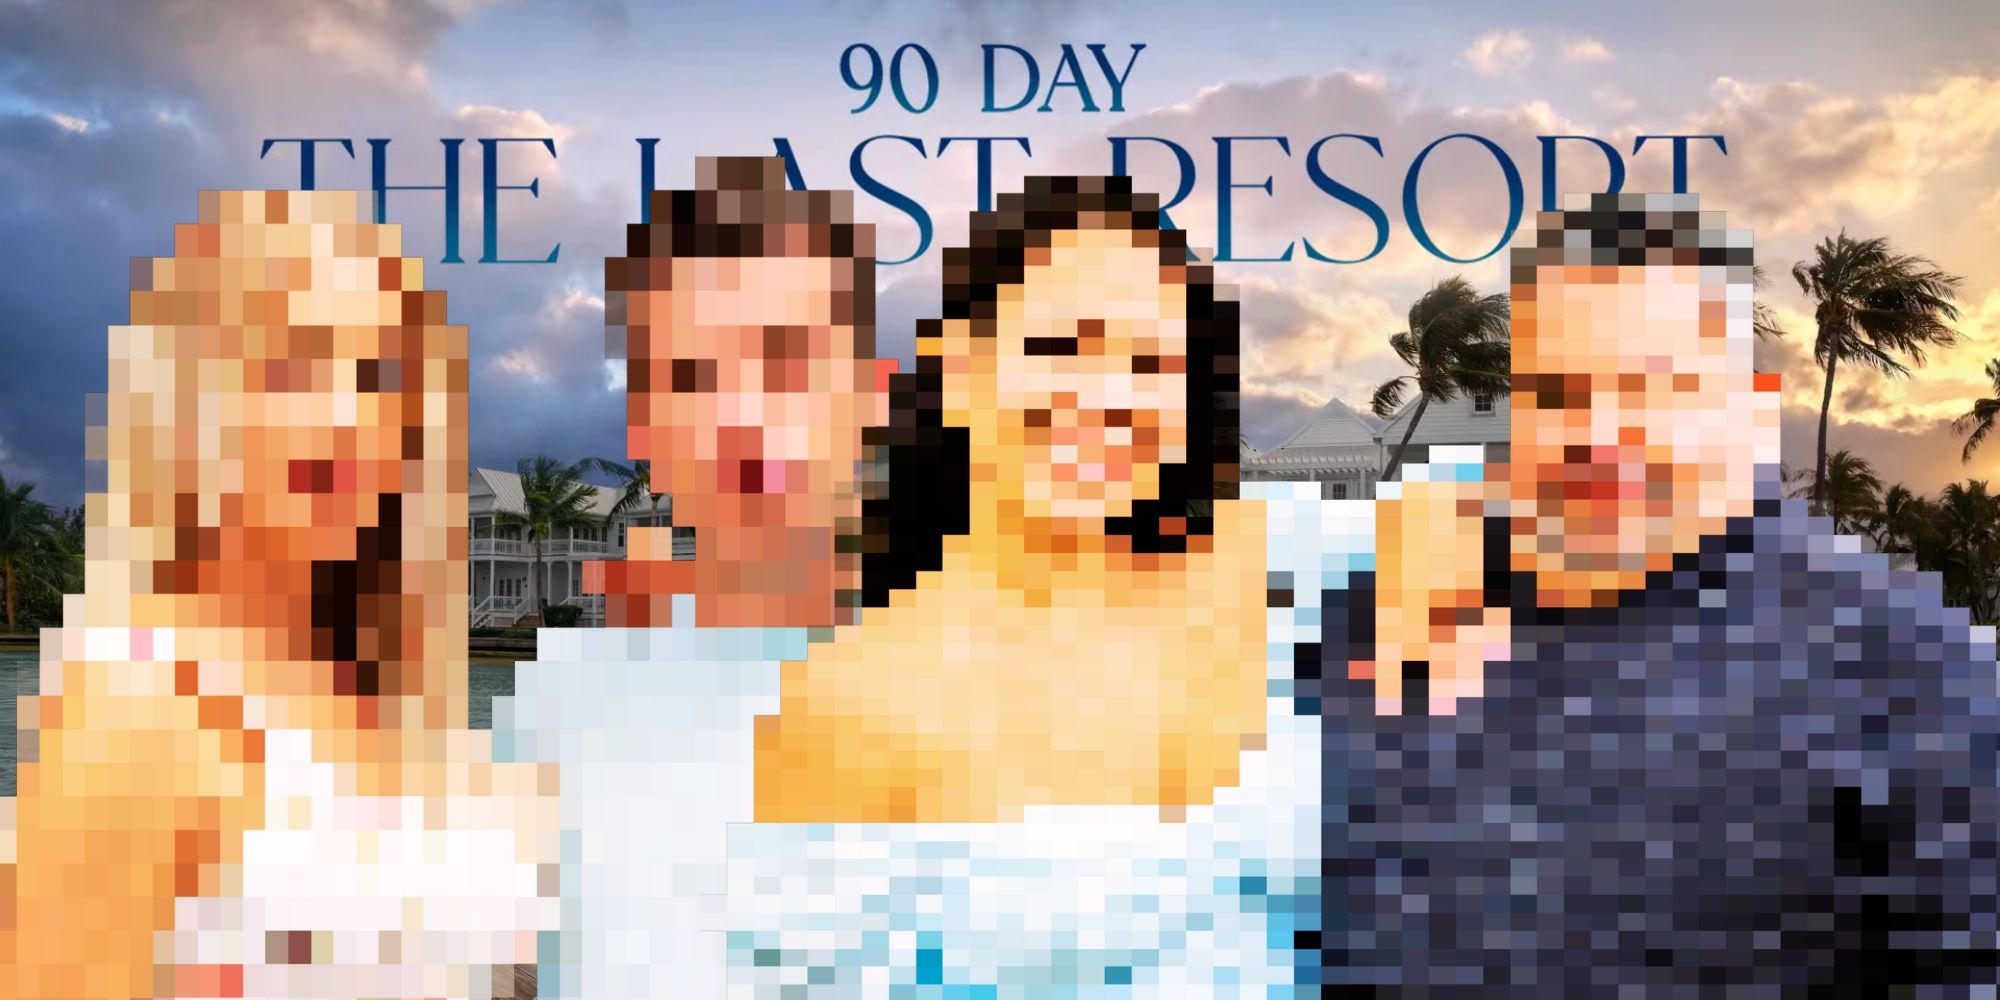 Pixelated images of 90 Day Fiance's Big Ed, Liz, Jovi and Yara in front of The Last Resort logo